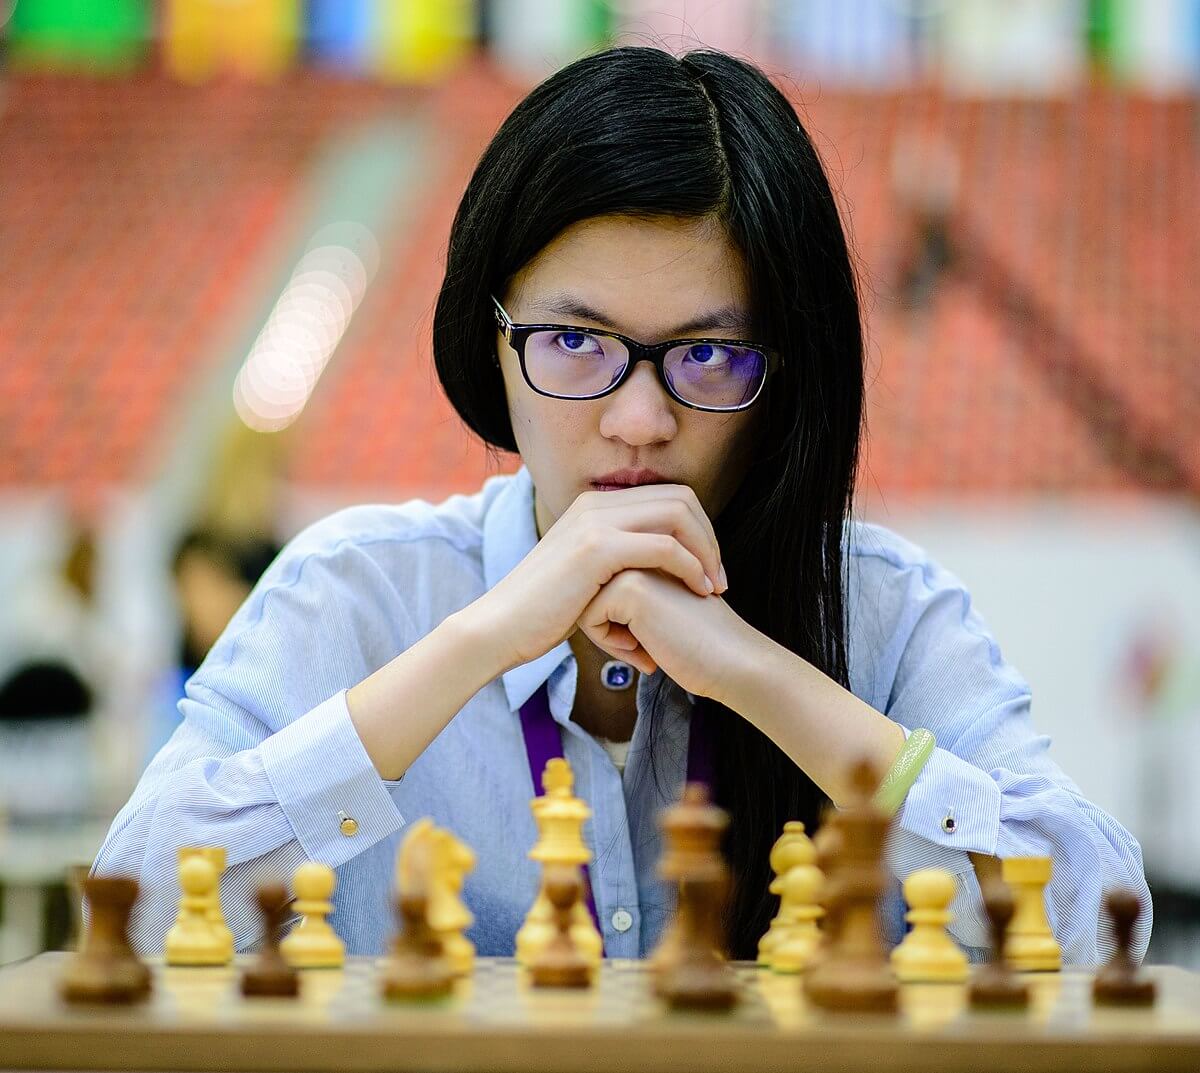 Why men rank higher than women at chess? Is it possible a female